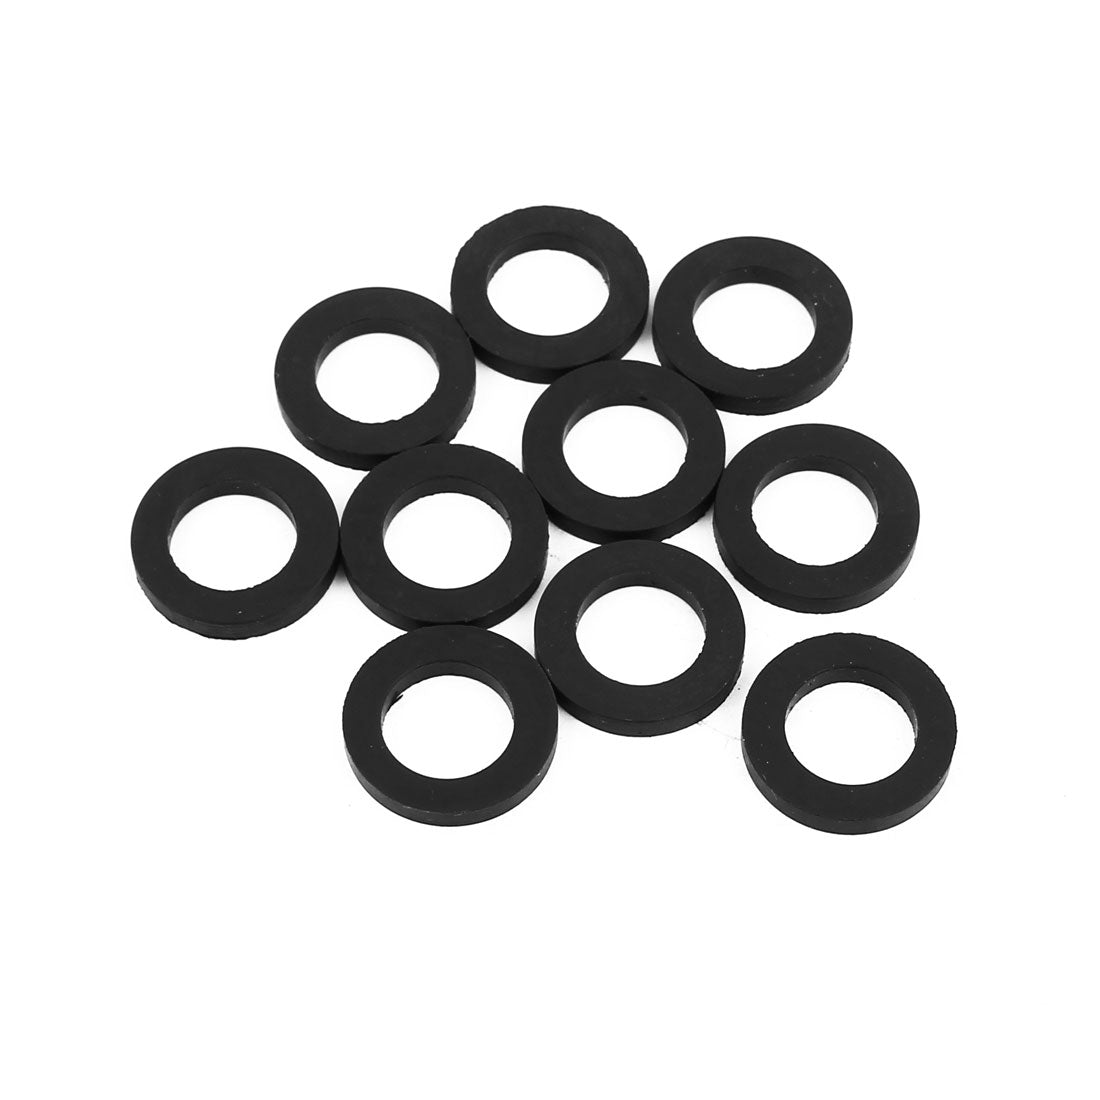 Uxcell Uxcell 13 x 21 x 3mm O-Ring Hose Gasket Flat Rubber  Lot for  Grommet 10pcs